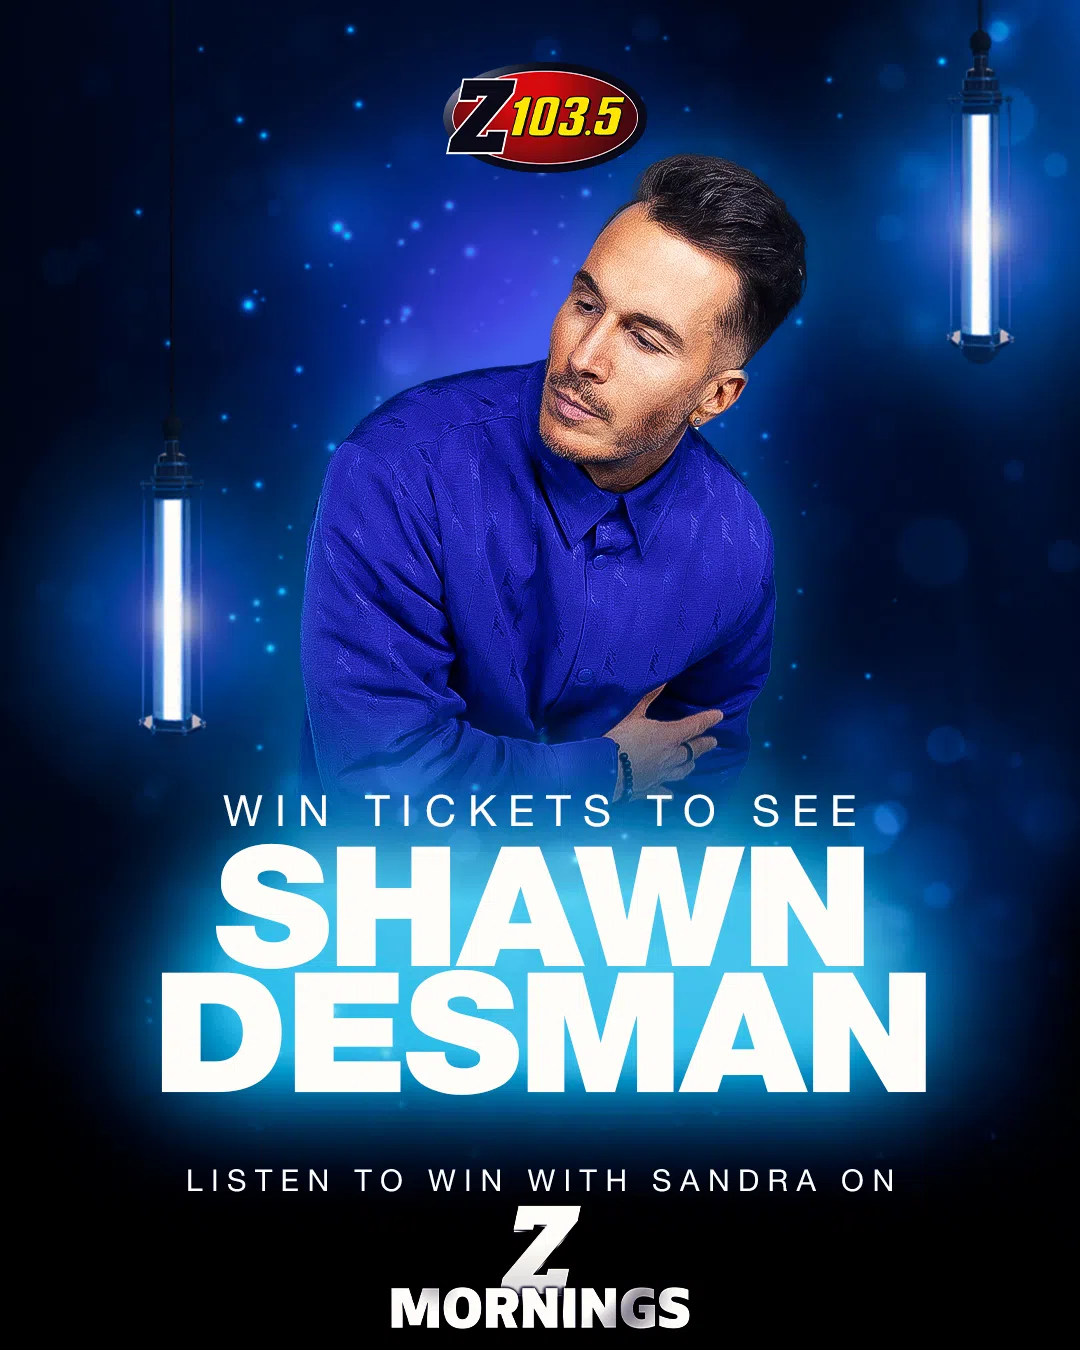 Feature: https://z1035.com/win/win-a-pair-of-tickets-to-see-shawn-desman/